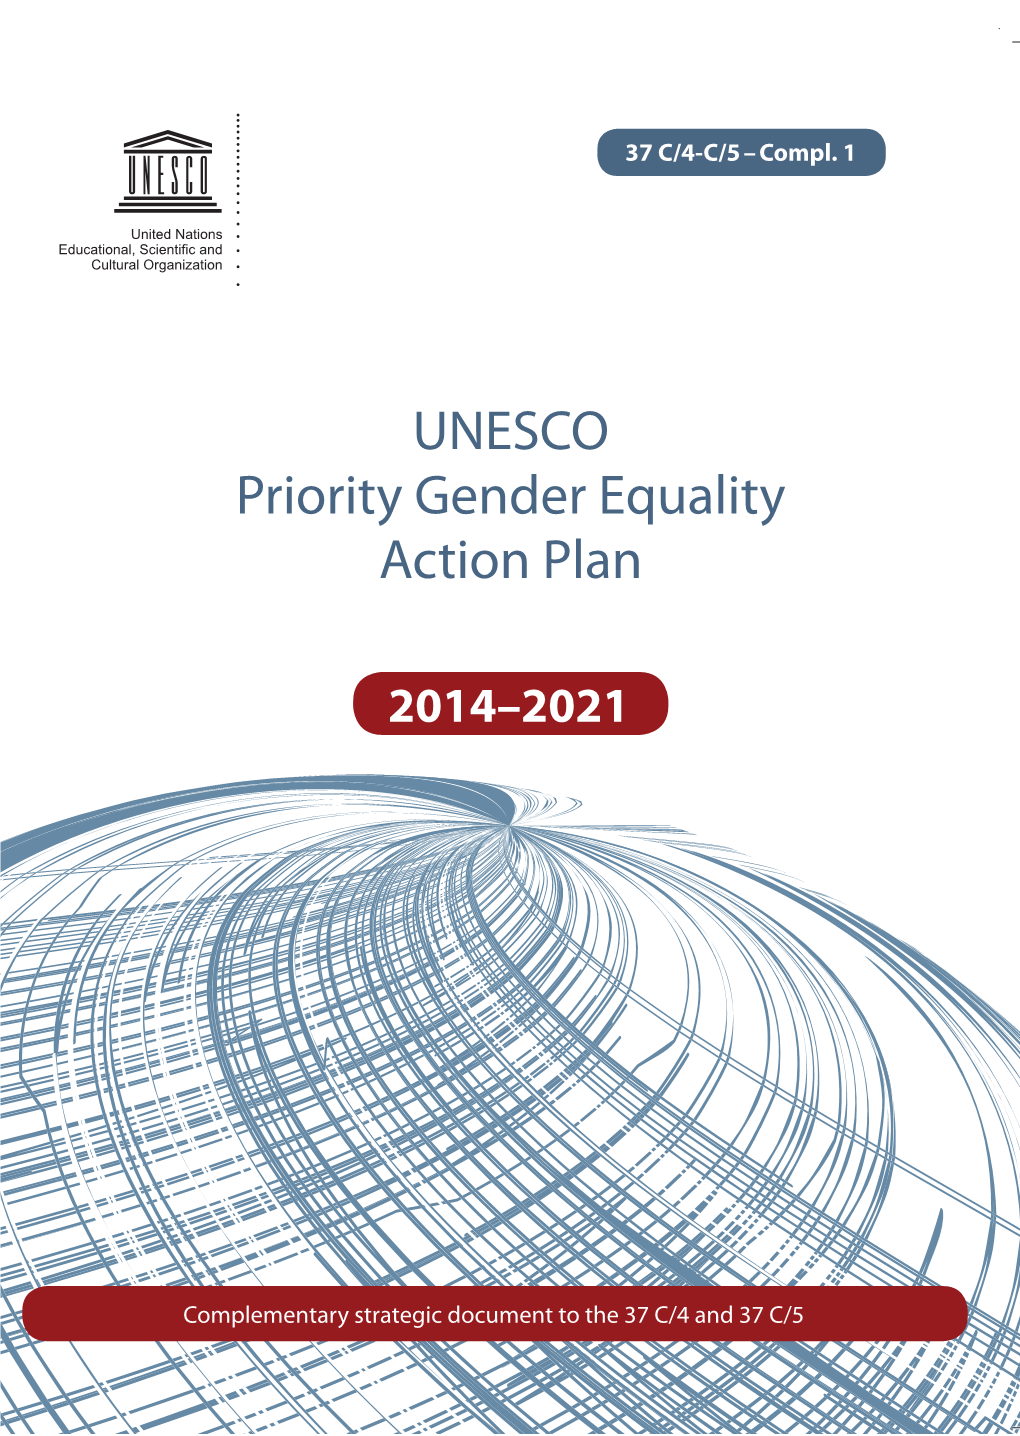 UNESCO Priority Gender Equality Action Plan: 2014-2021